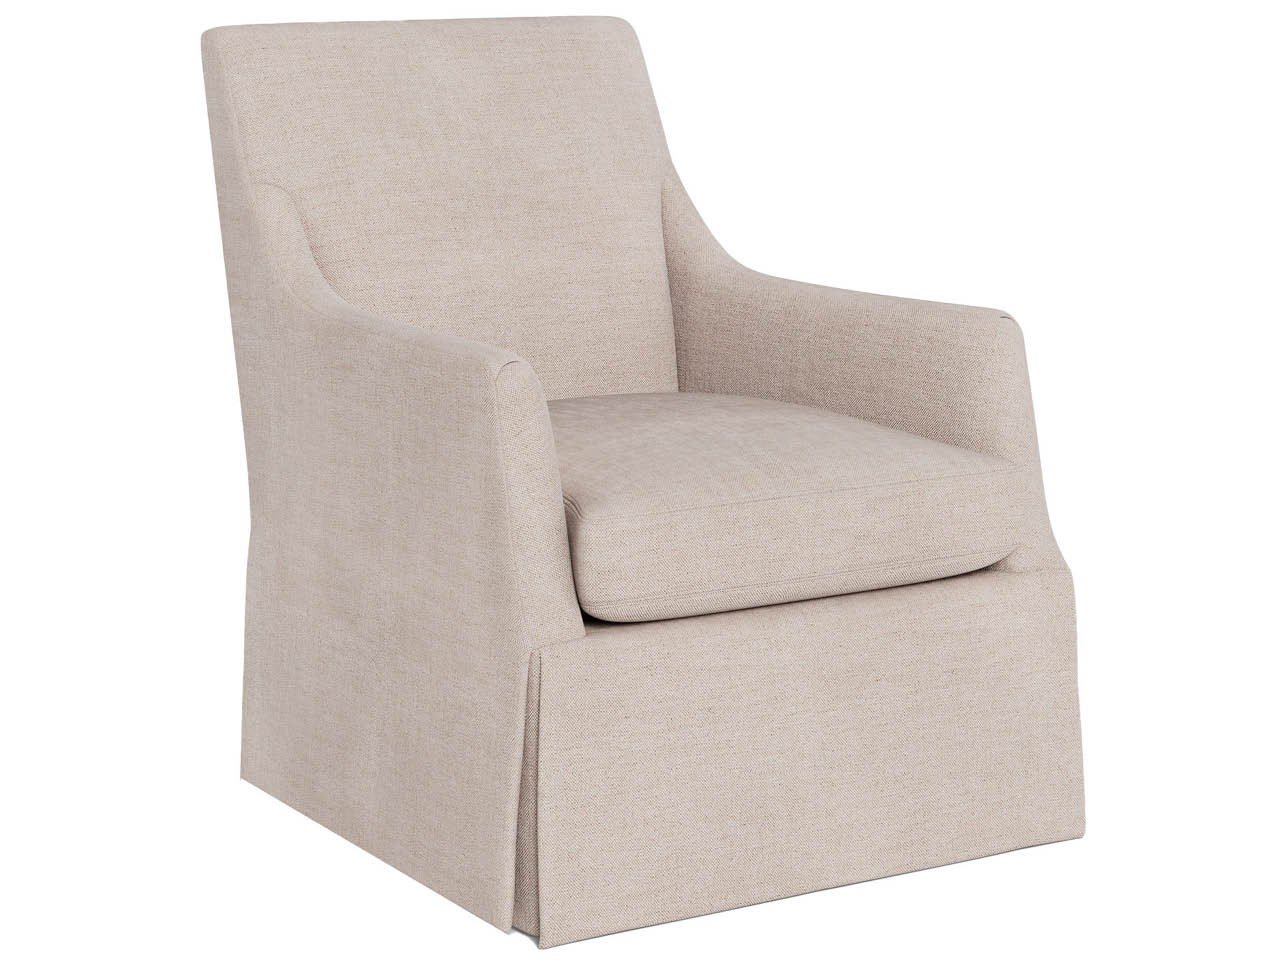 Anniston Swivel Chair - Special Order